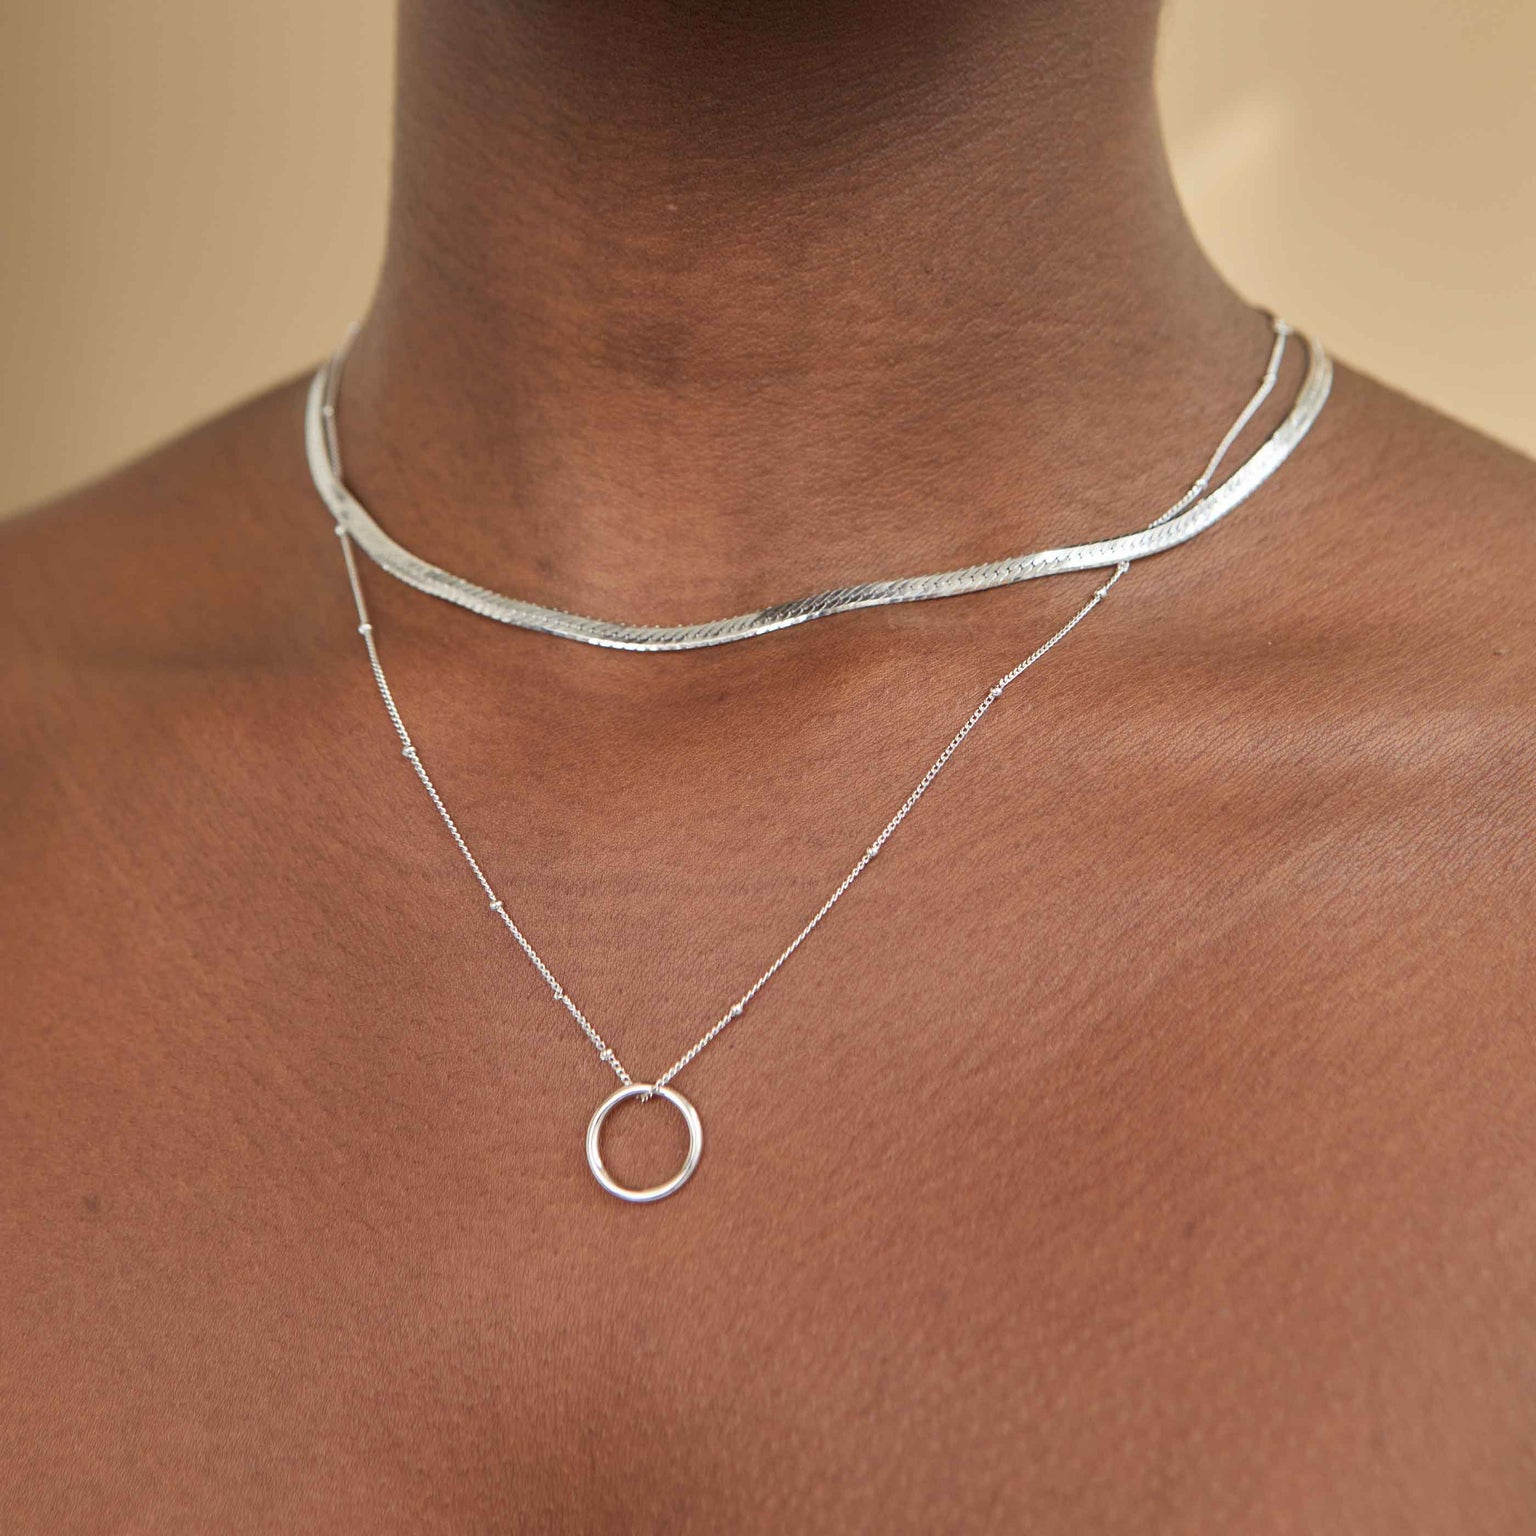 Sterling Silver Snake Chain Necklace, Silver Minimalist Dainty